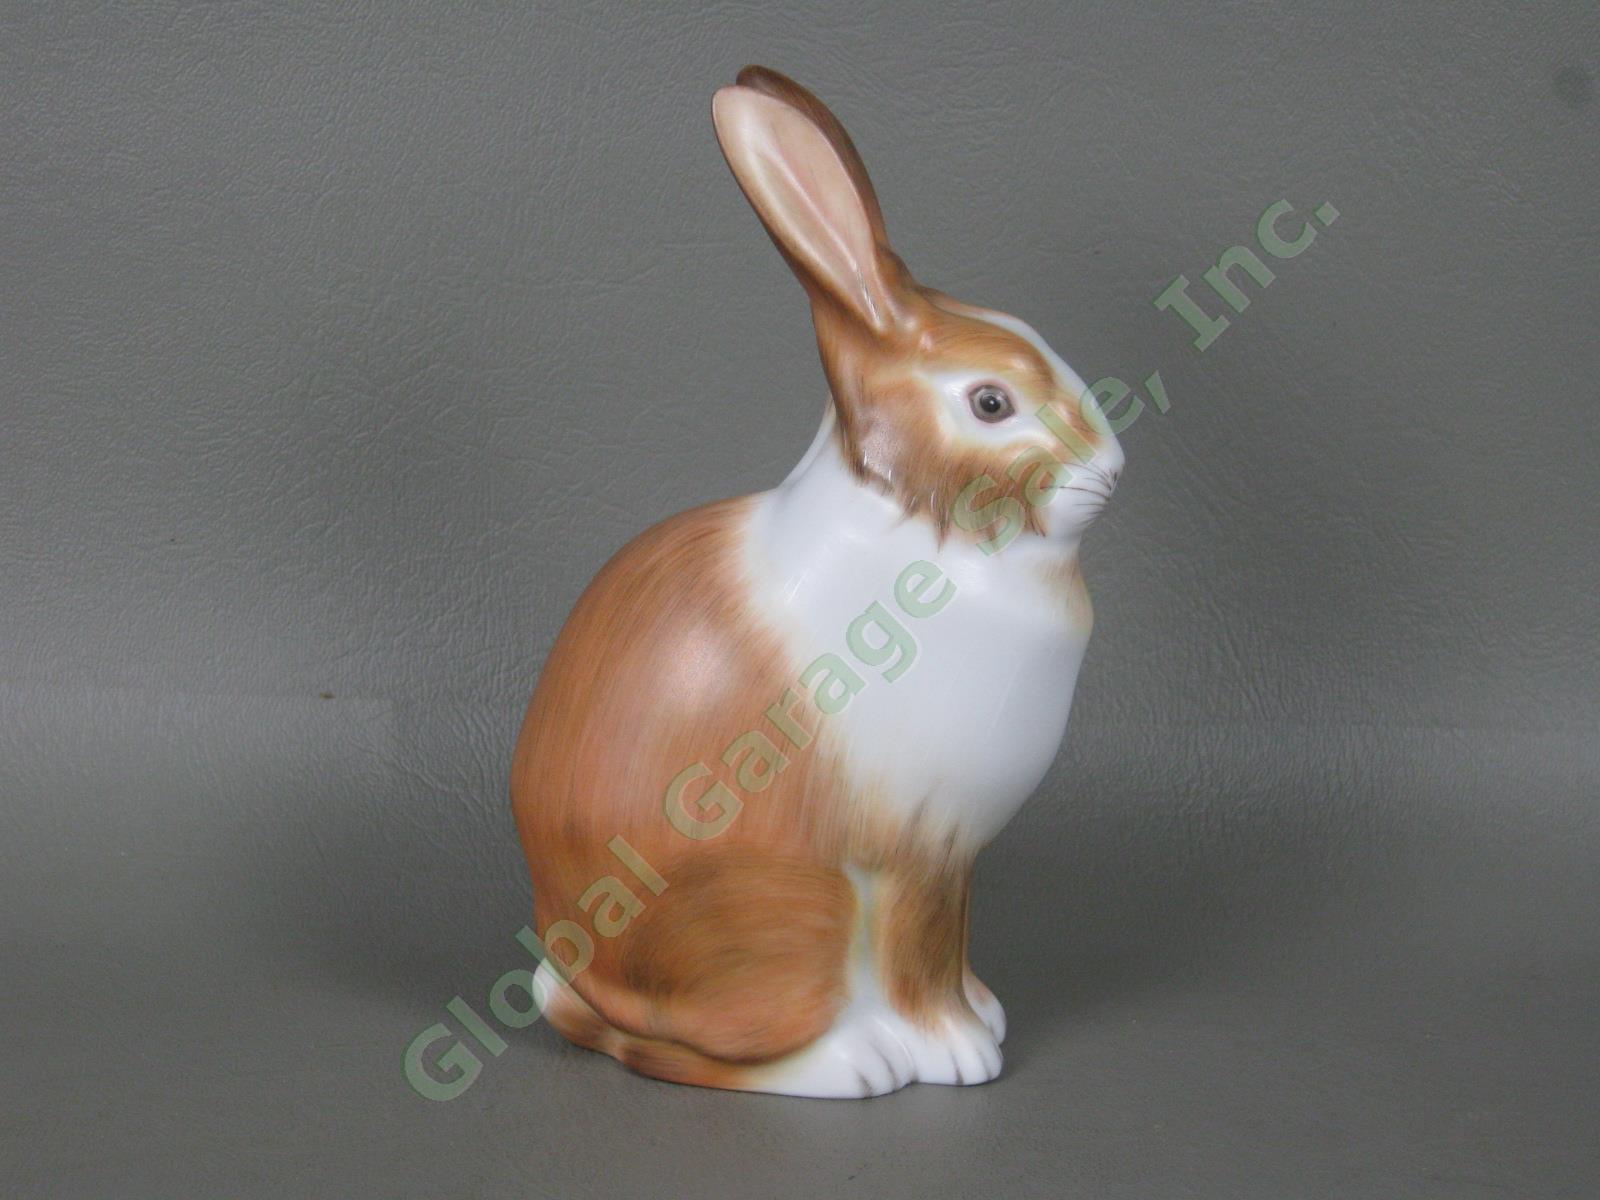 Herend Brown & White Handpainted 5.5" Porcelain Rabbit Figurine No Reserve Price 1